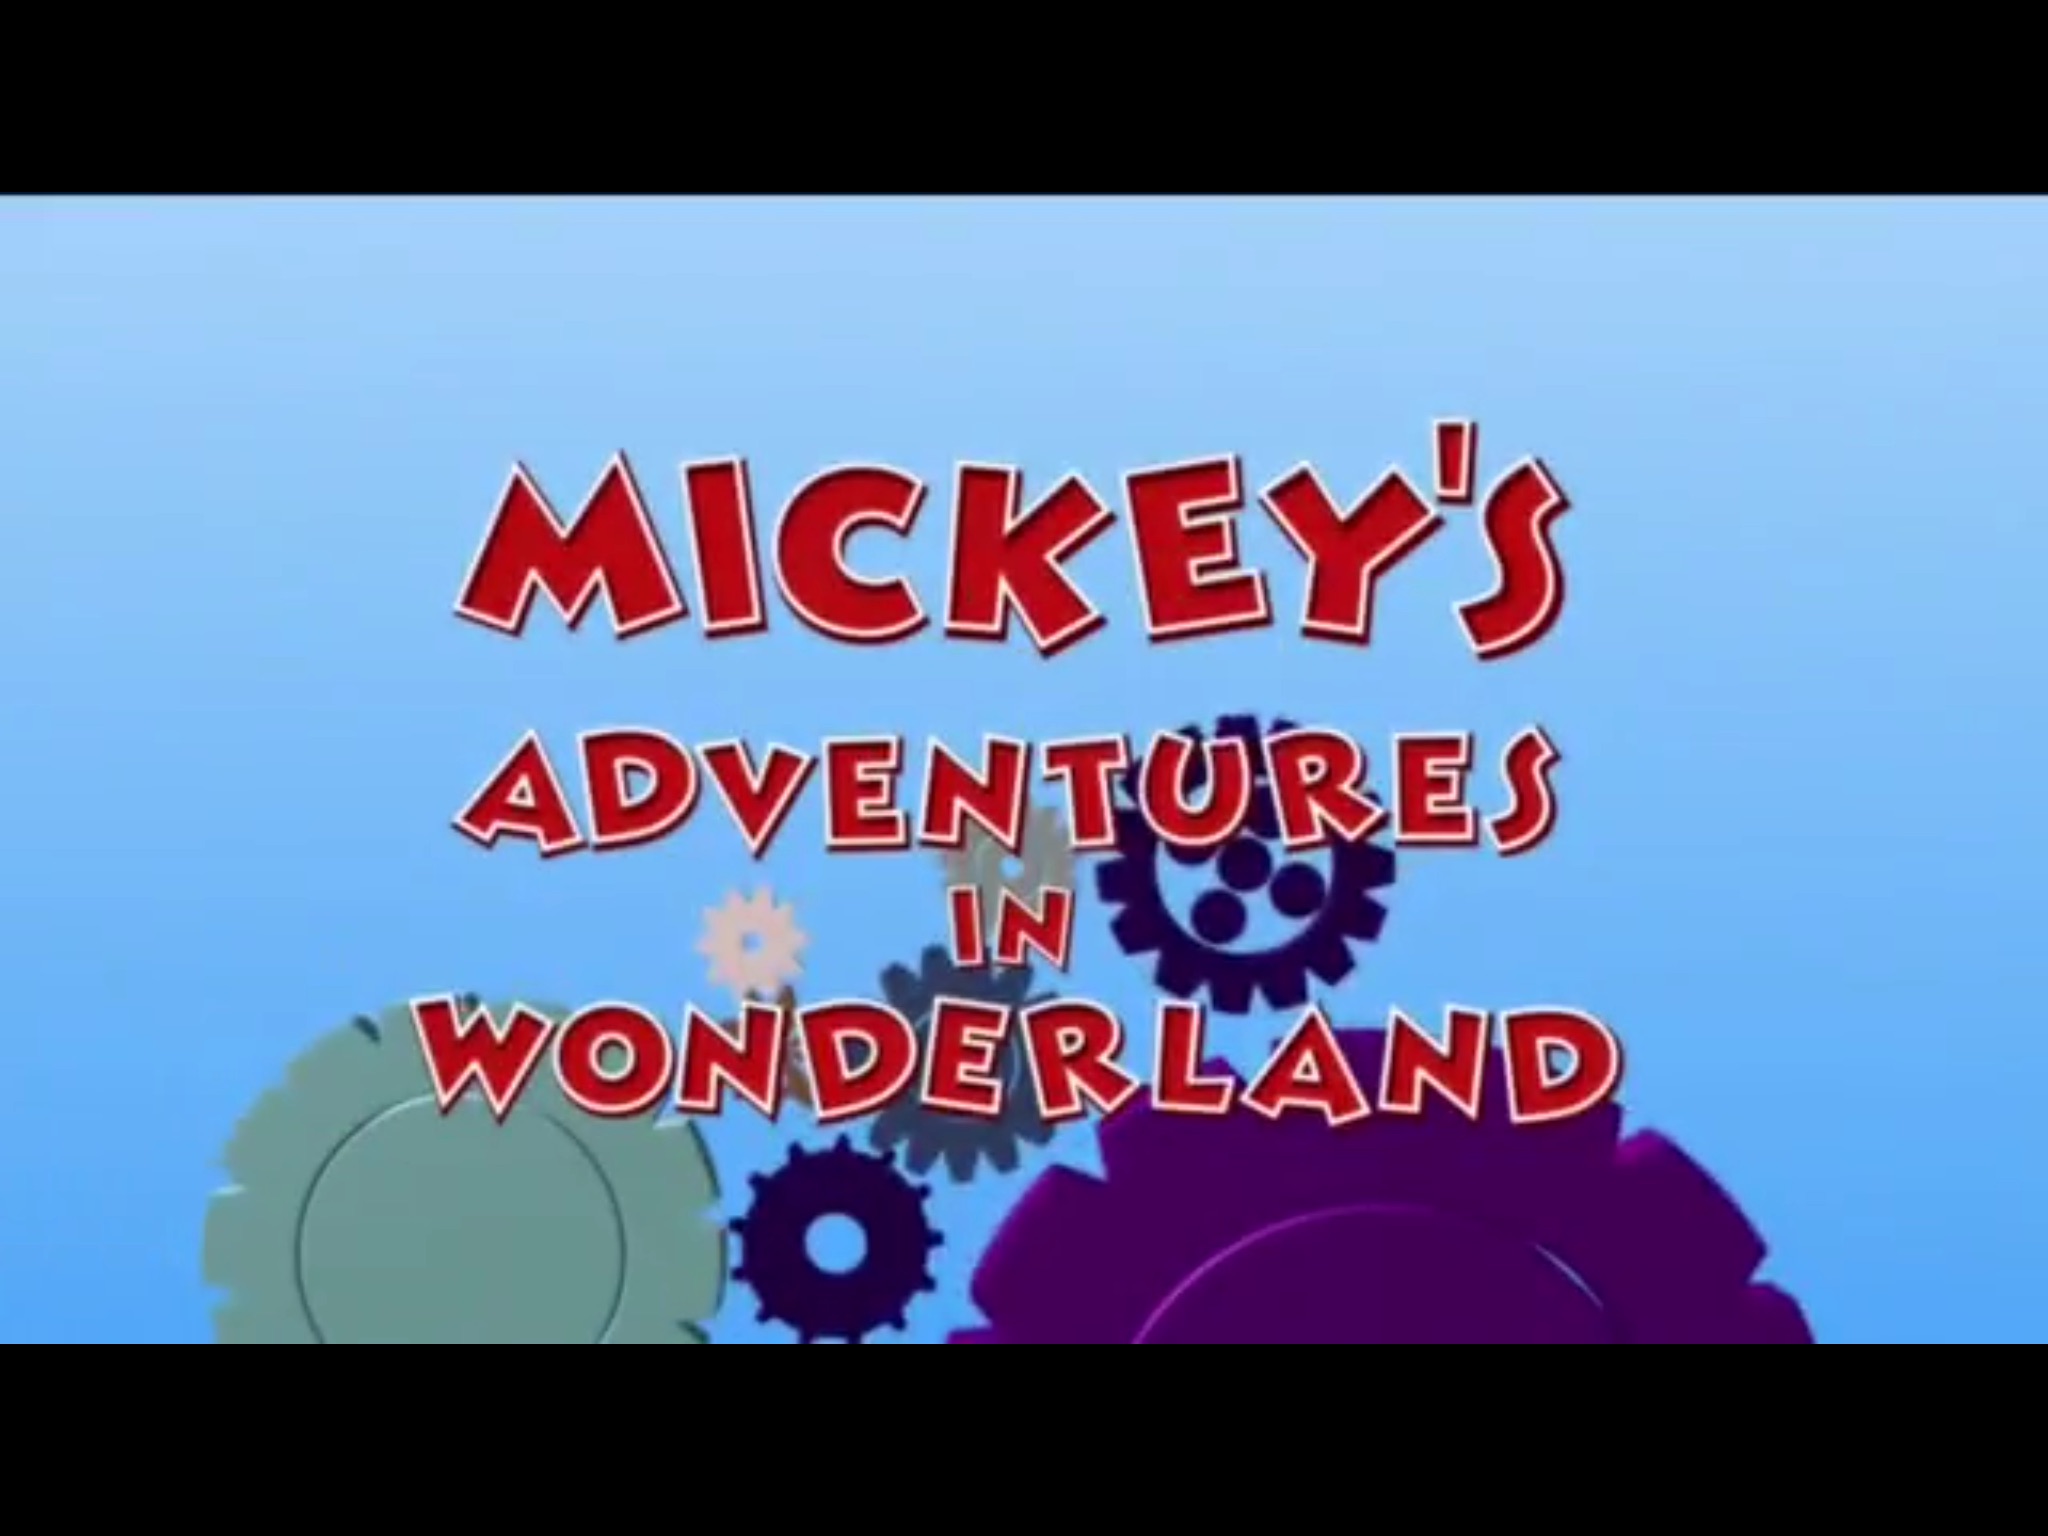 Mickey Mouse Clubhouse Full Episodes - Mickeys Mousekeball Mickey Mouse  Clubhouse - Video Dailymotion